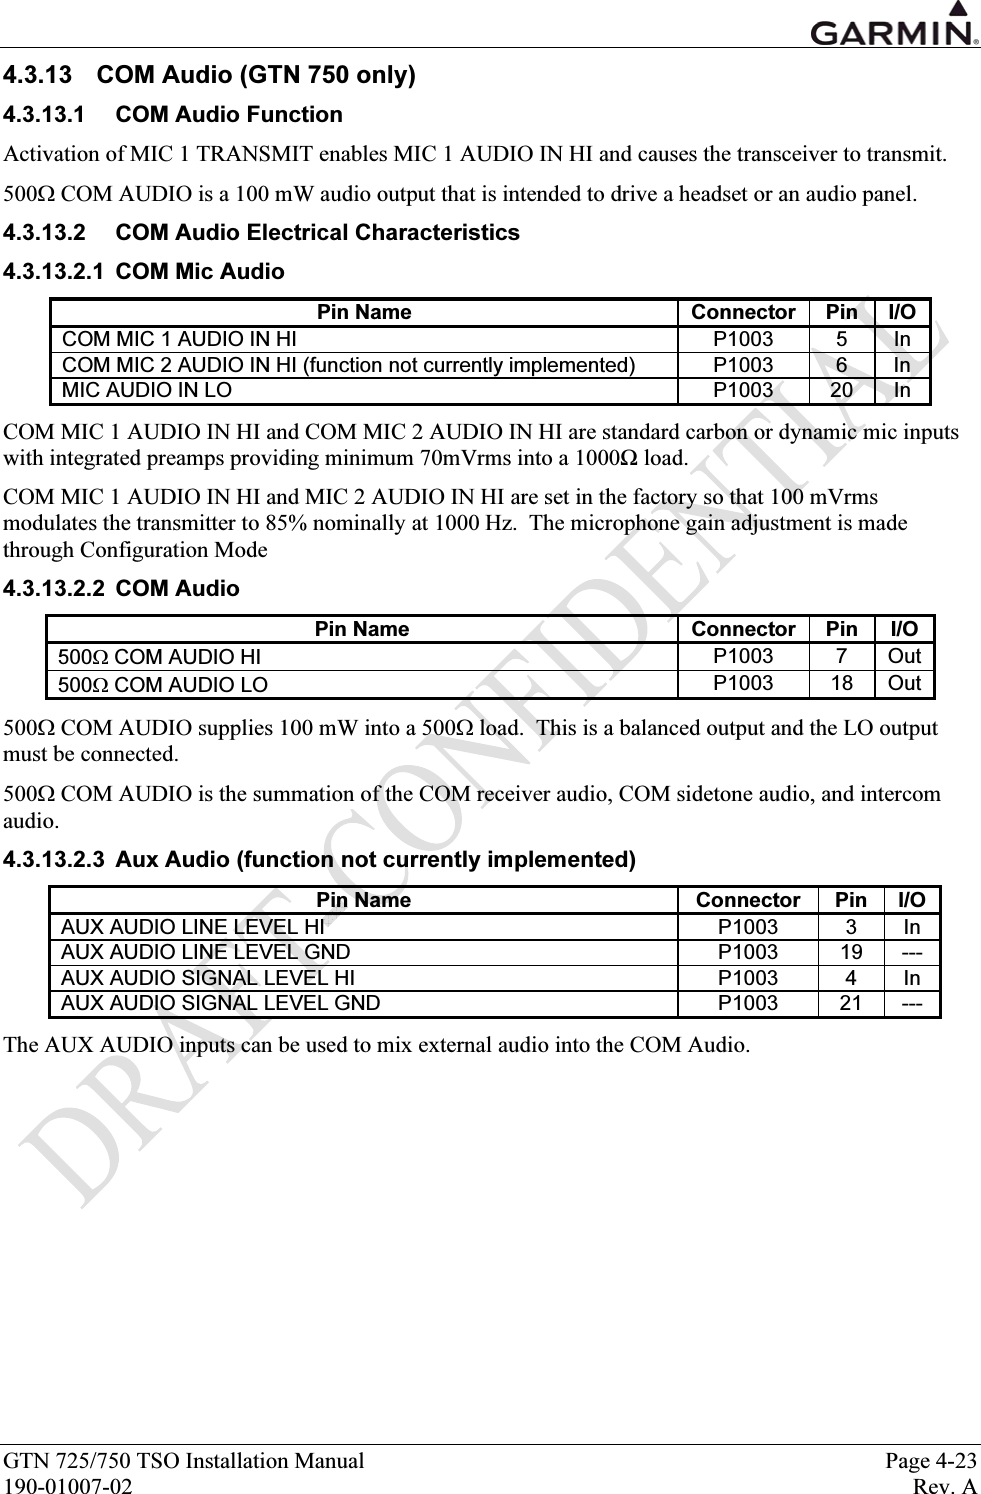  GTN 725/750 TSO Installation Manual  Page 4-23 190-01007-02  Rev. A 4.3.13  COM Audio (GTN 750 only) 4.3.13.1  COM Audio Function Activation of MIC 1 TRANSMIT enables MIC 1 AUDIO IN HI and causes the transceiver to transmit. 500Ω COM AUDIO is a 100 mW audio output that is intended to drive a headset or an audio panel. 4.3.13.2  COM Audio Electrical Characteristics 4.3.13.2.1 COM Mic Audio Pin Name  Connector  Pin  I/O COM MIC 1 AUDIO IN HI  P1003  5  In COM MIC 2 AUDIO IN HI (function not currently implemented)  P1003  6  In MIC AUDIO IN LO  P1003  20  In COM MIC 1 AUDIO IN HI and COM MIC 2 AUDIO IN HI are standard carbon or dynamic mic inputs with integrated preamps providing minimum 70mVrms into a 1000Ω load. COM MIC 1 AUDIO IN HI and MIC 2 AUDIO IN HI are set in the factory so that 100 mVrms modulates the transmitter to 85% nominally at 1000 Hz.  The microphone gain adjustment is made through Configuration Mode 4.3.13.2.2 COM Audio Pin Name  Connector  Pin  I/O 500Ω COM AUDIO HI  P1003 7 Out500Ω COM AUDIO LO  P1003 18 Out500Ω COM AUDIO supplies 100 mW into a 500Ω load.  This is a balanced output and the LO output must be connected. 500Ω COM AUDIO is the summation of the COM receiver audio, COM sidetone audio, and intercom audio. 4.3.13.2.3  Aux Audio (function not currently implemented) Pin Name  Connector  Pin  I/O AUX AUDIO LINE LEVEL HI   P1003  3  In AUX AUDIO LINE LEVEL GND  P1003  19  --- AUX AUDIO SIGNAL LEVEL HI  P1003  4  In AUX AUDIO SIGNAL LEVEL GND  P1003  21  --- The AUX AUDIO inputs can be used to mix external audio into the COM Audio. 